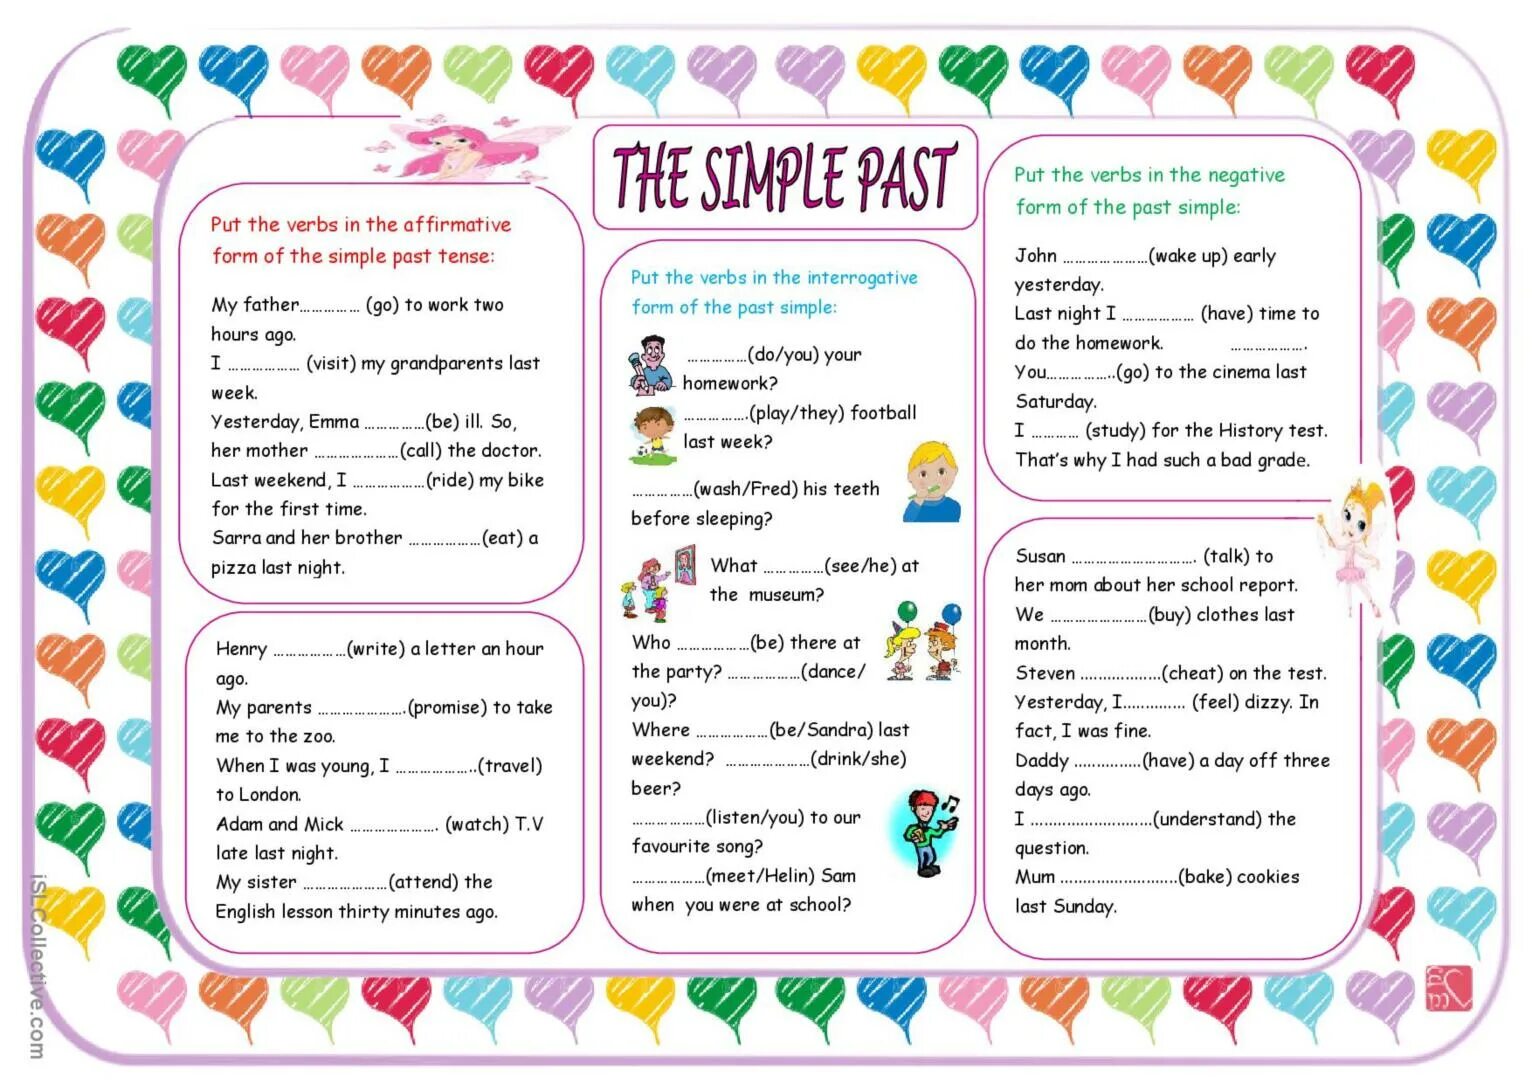 Present tenses questions. Past simple positive and negative Worksheets. Паст Симпл Worksheets. Past simple английский Worksheets. ESL past simple Worksheets.